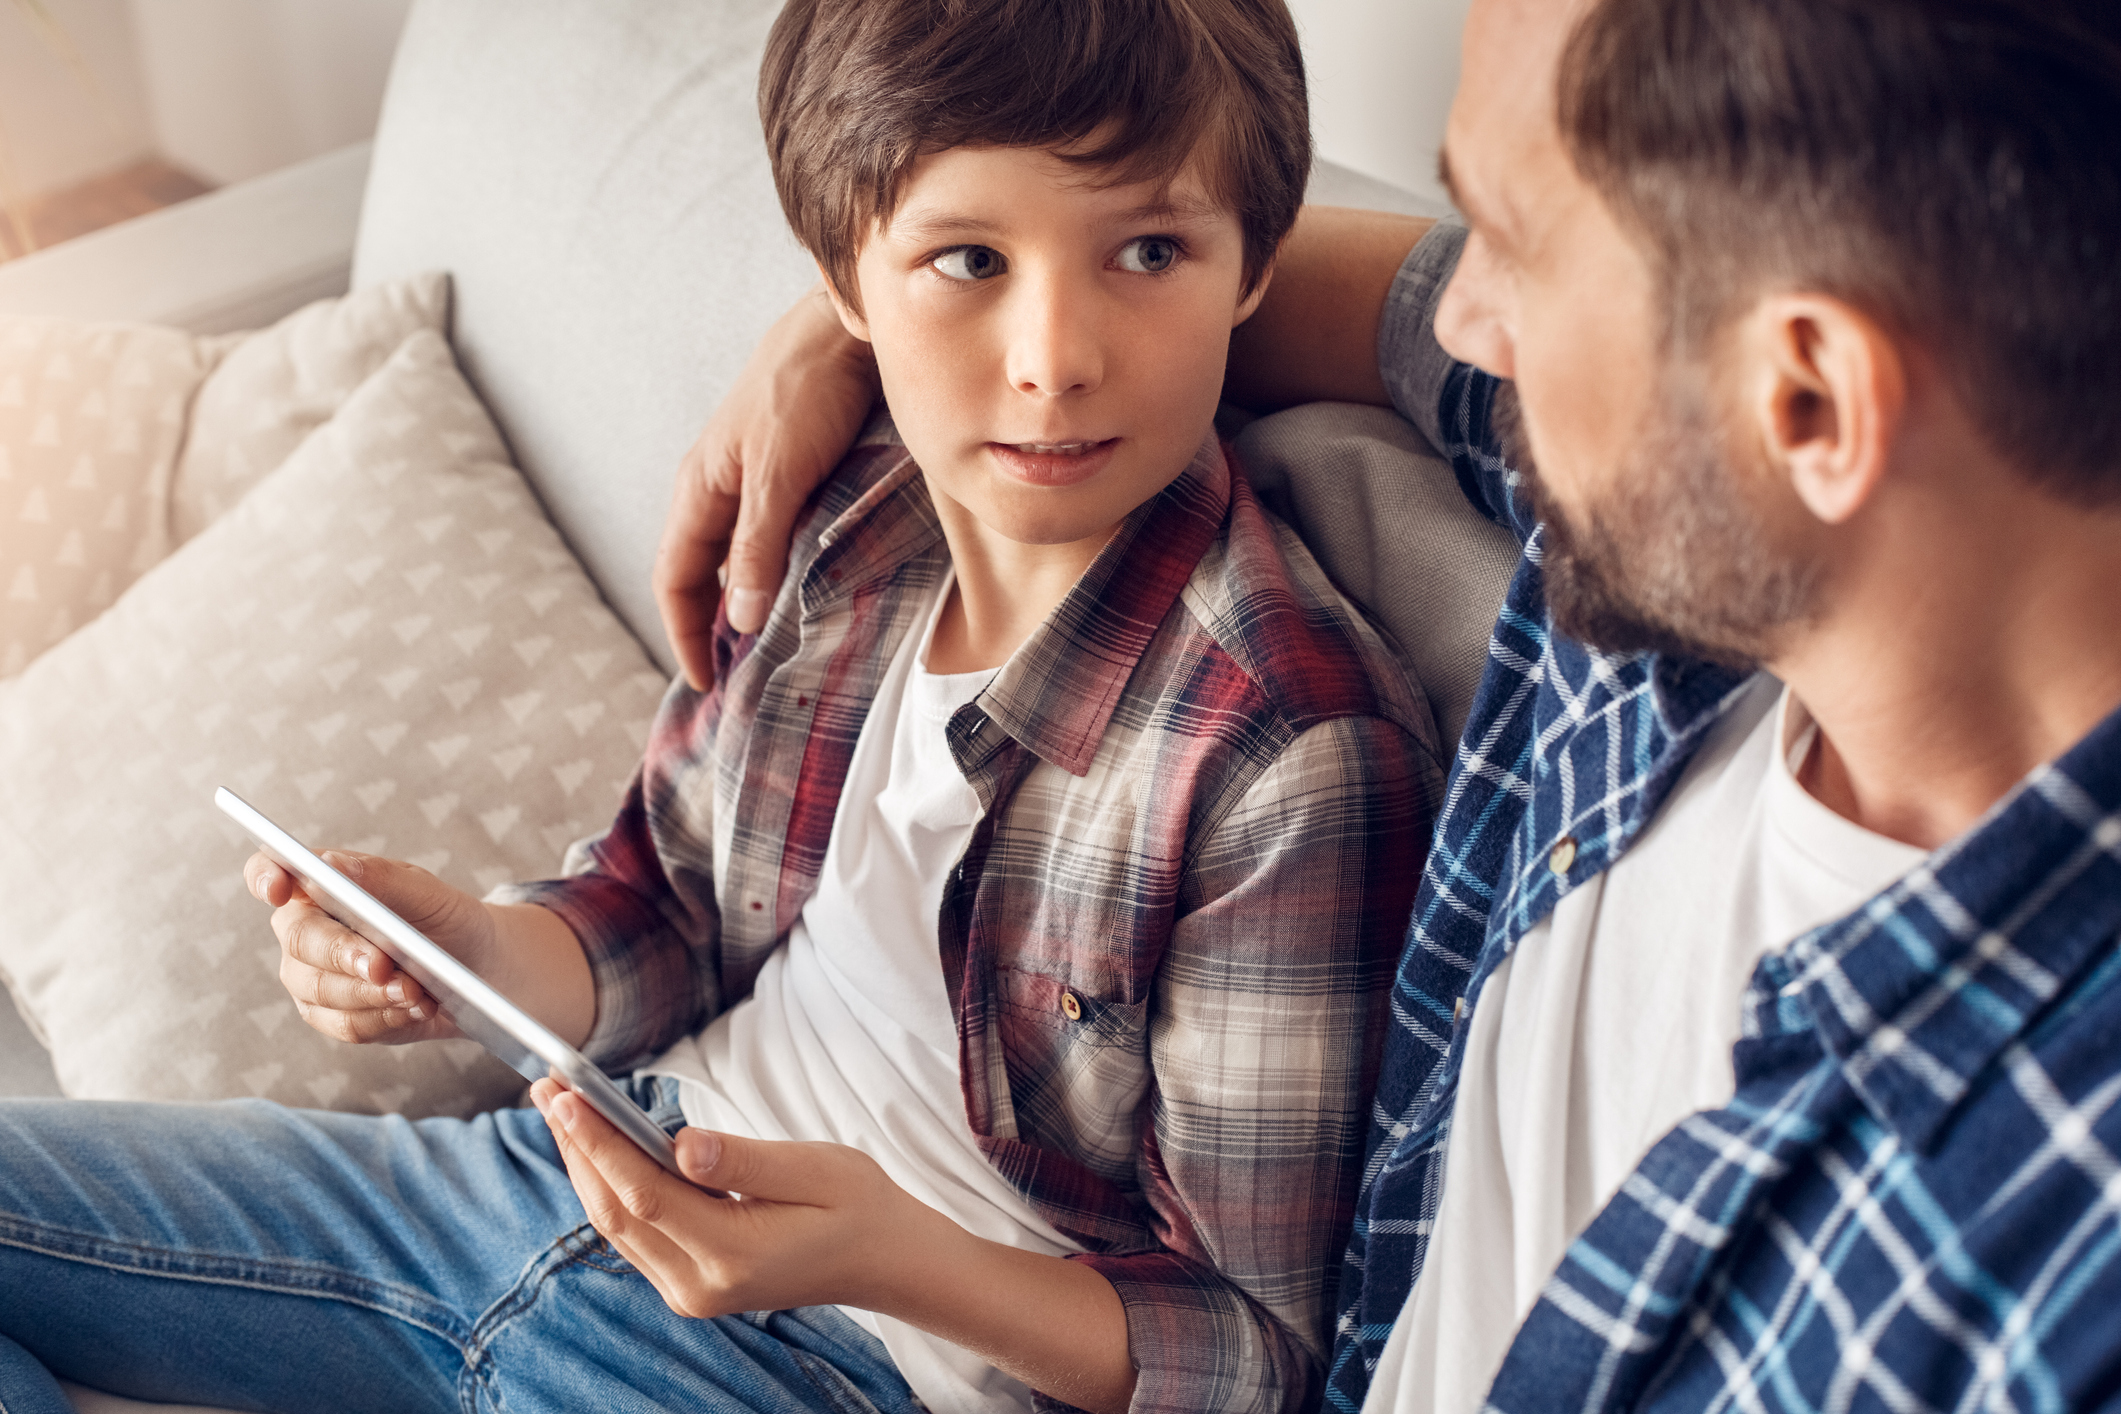 Father and little son together at home sitting on sofa dad hugging boy holding digital tablet looking at each other serious close-up